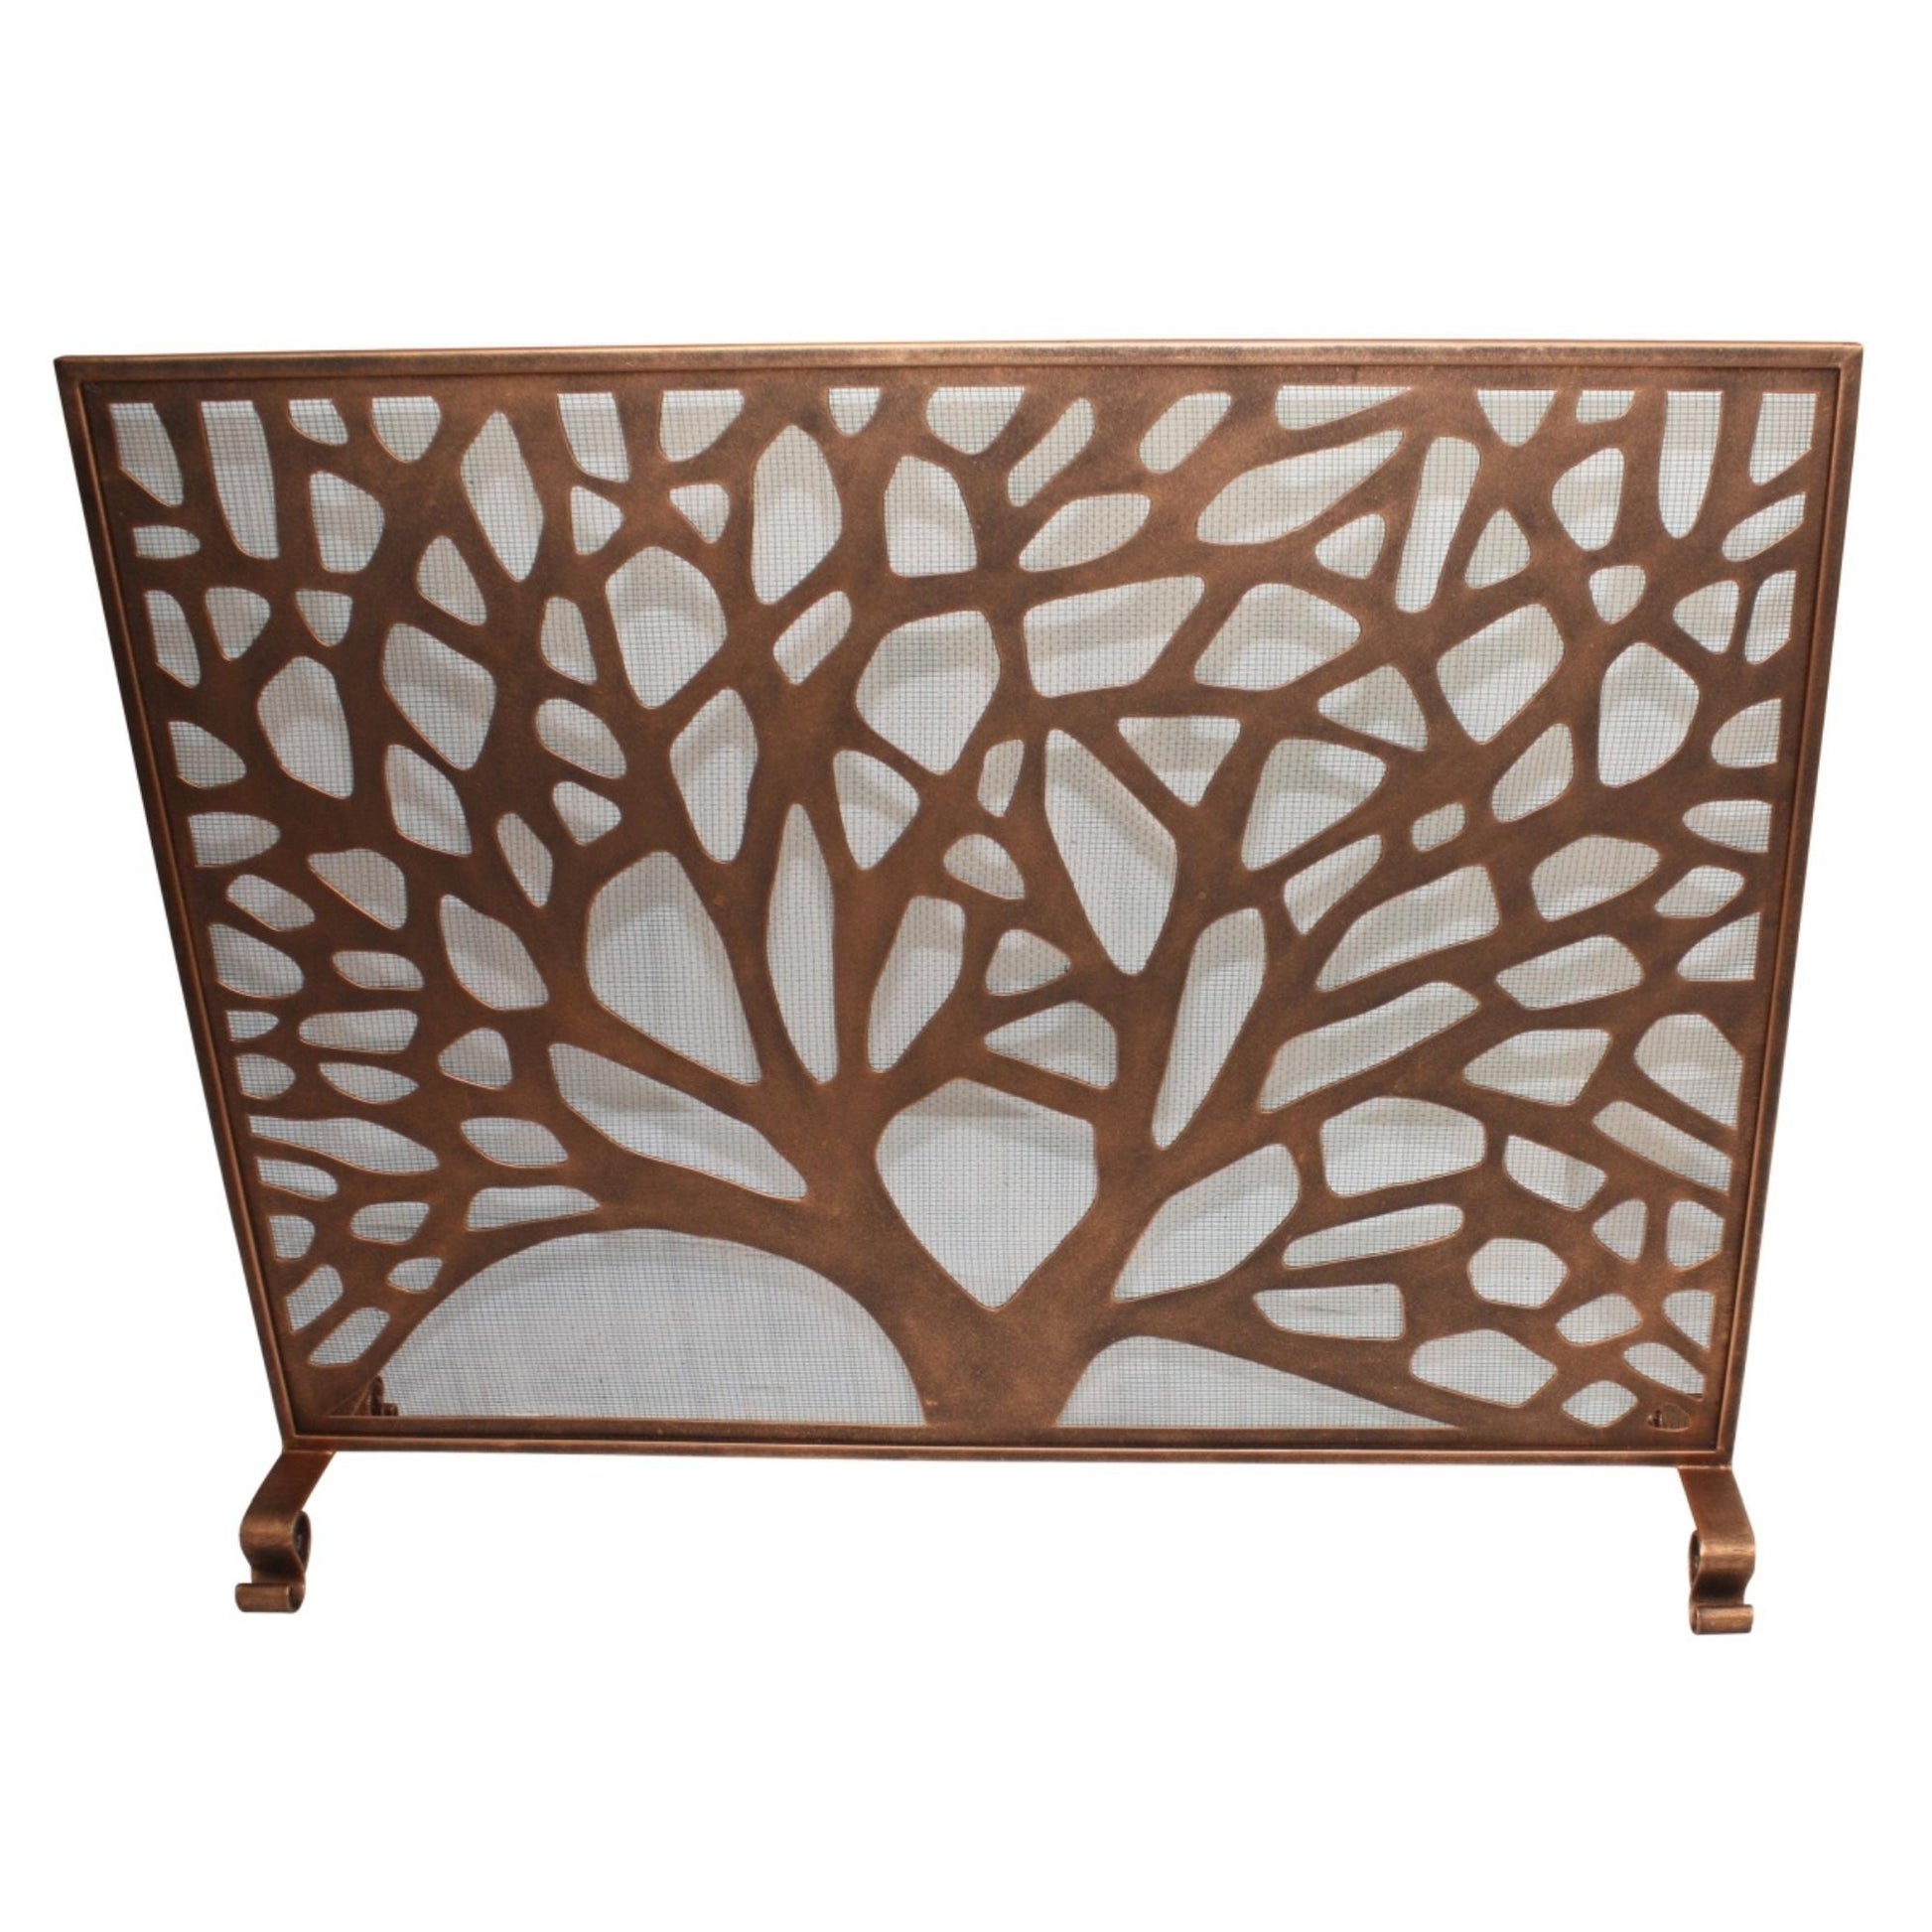 Abstract Iron Tree Fire Screen with Mesh Backing in a Beautiful Rose Gold Finish | InsideOutCatalog.com